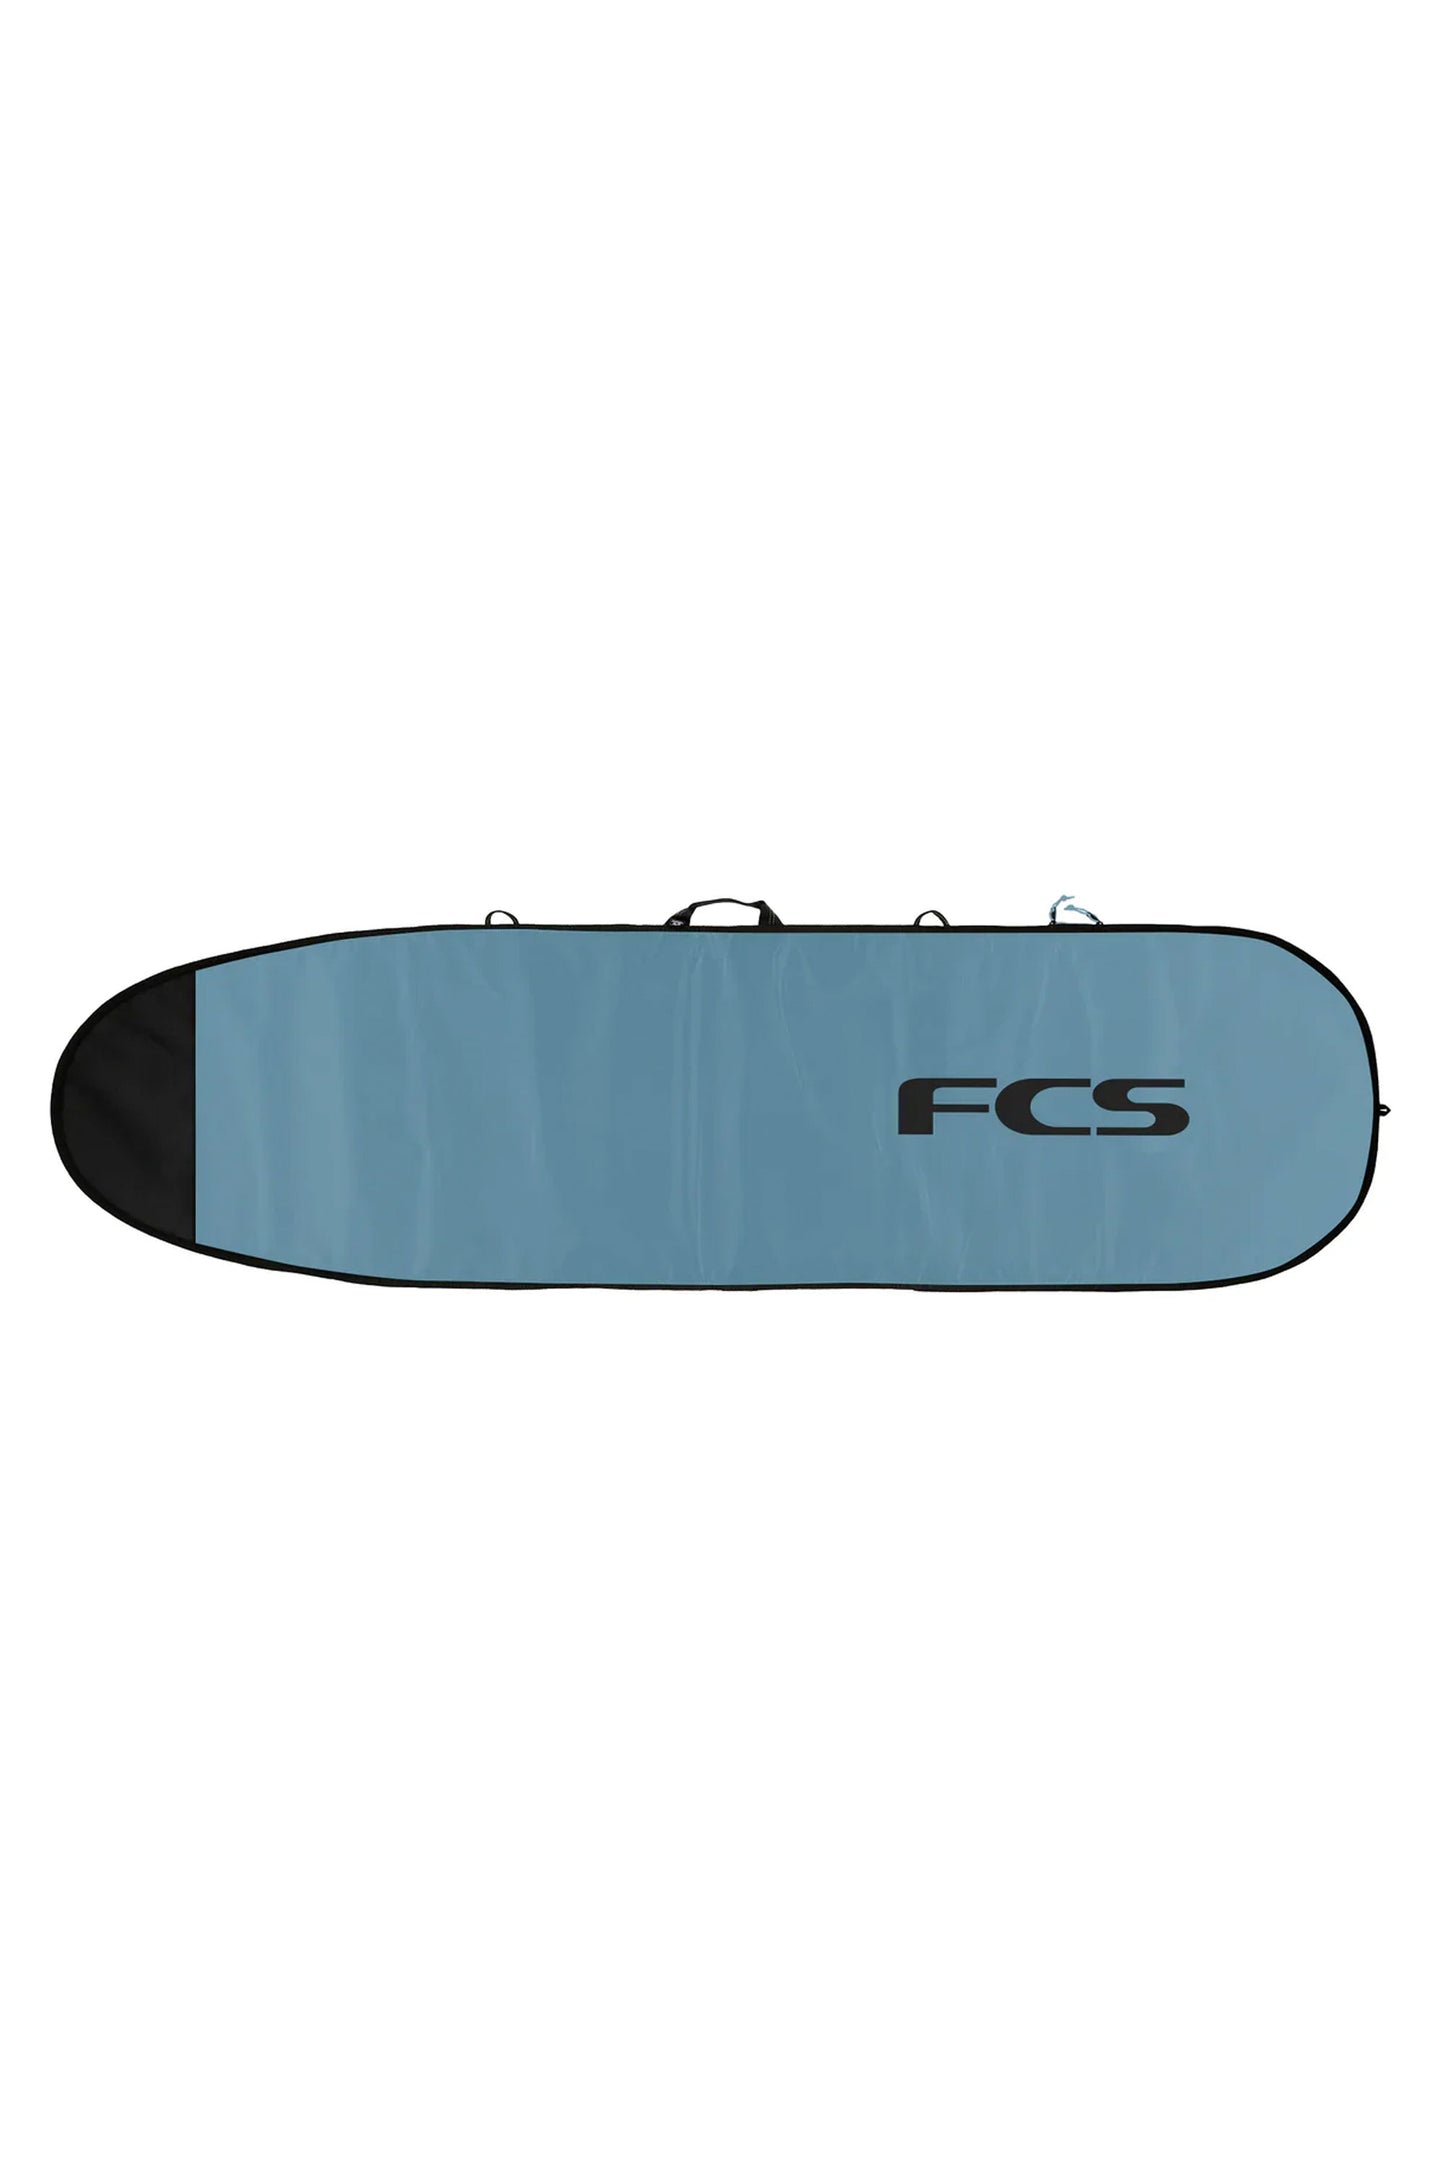 Pukas-Surf-Shop-fcs-classic-fun-board-cover-tranquil-blue